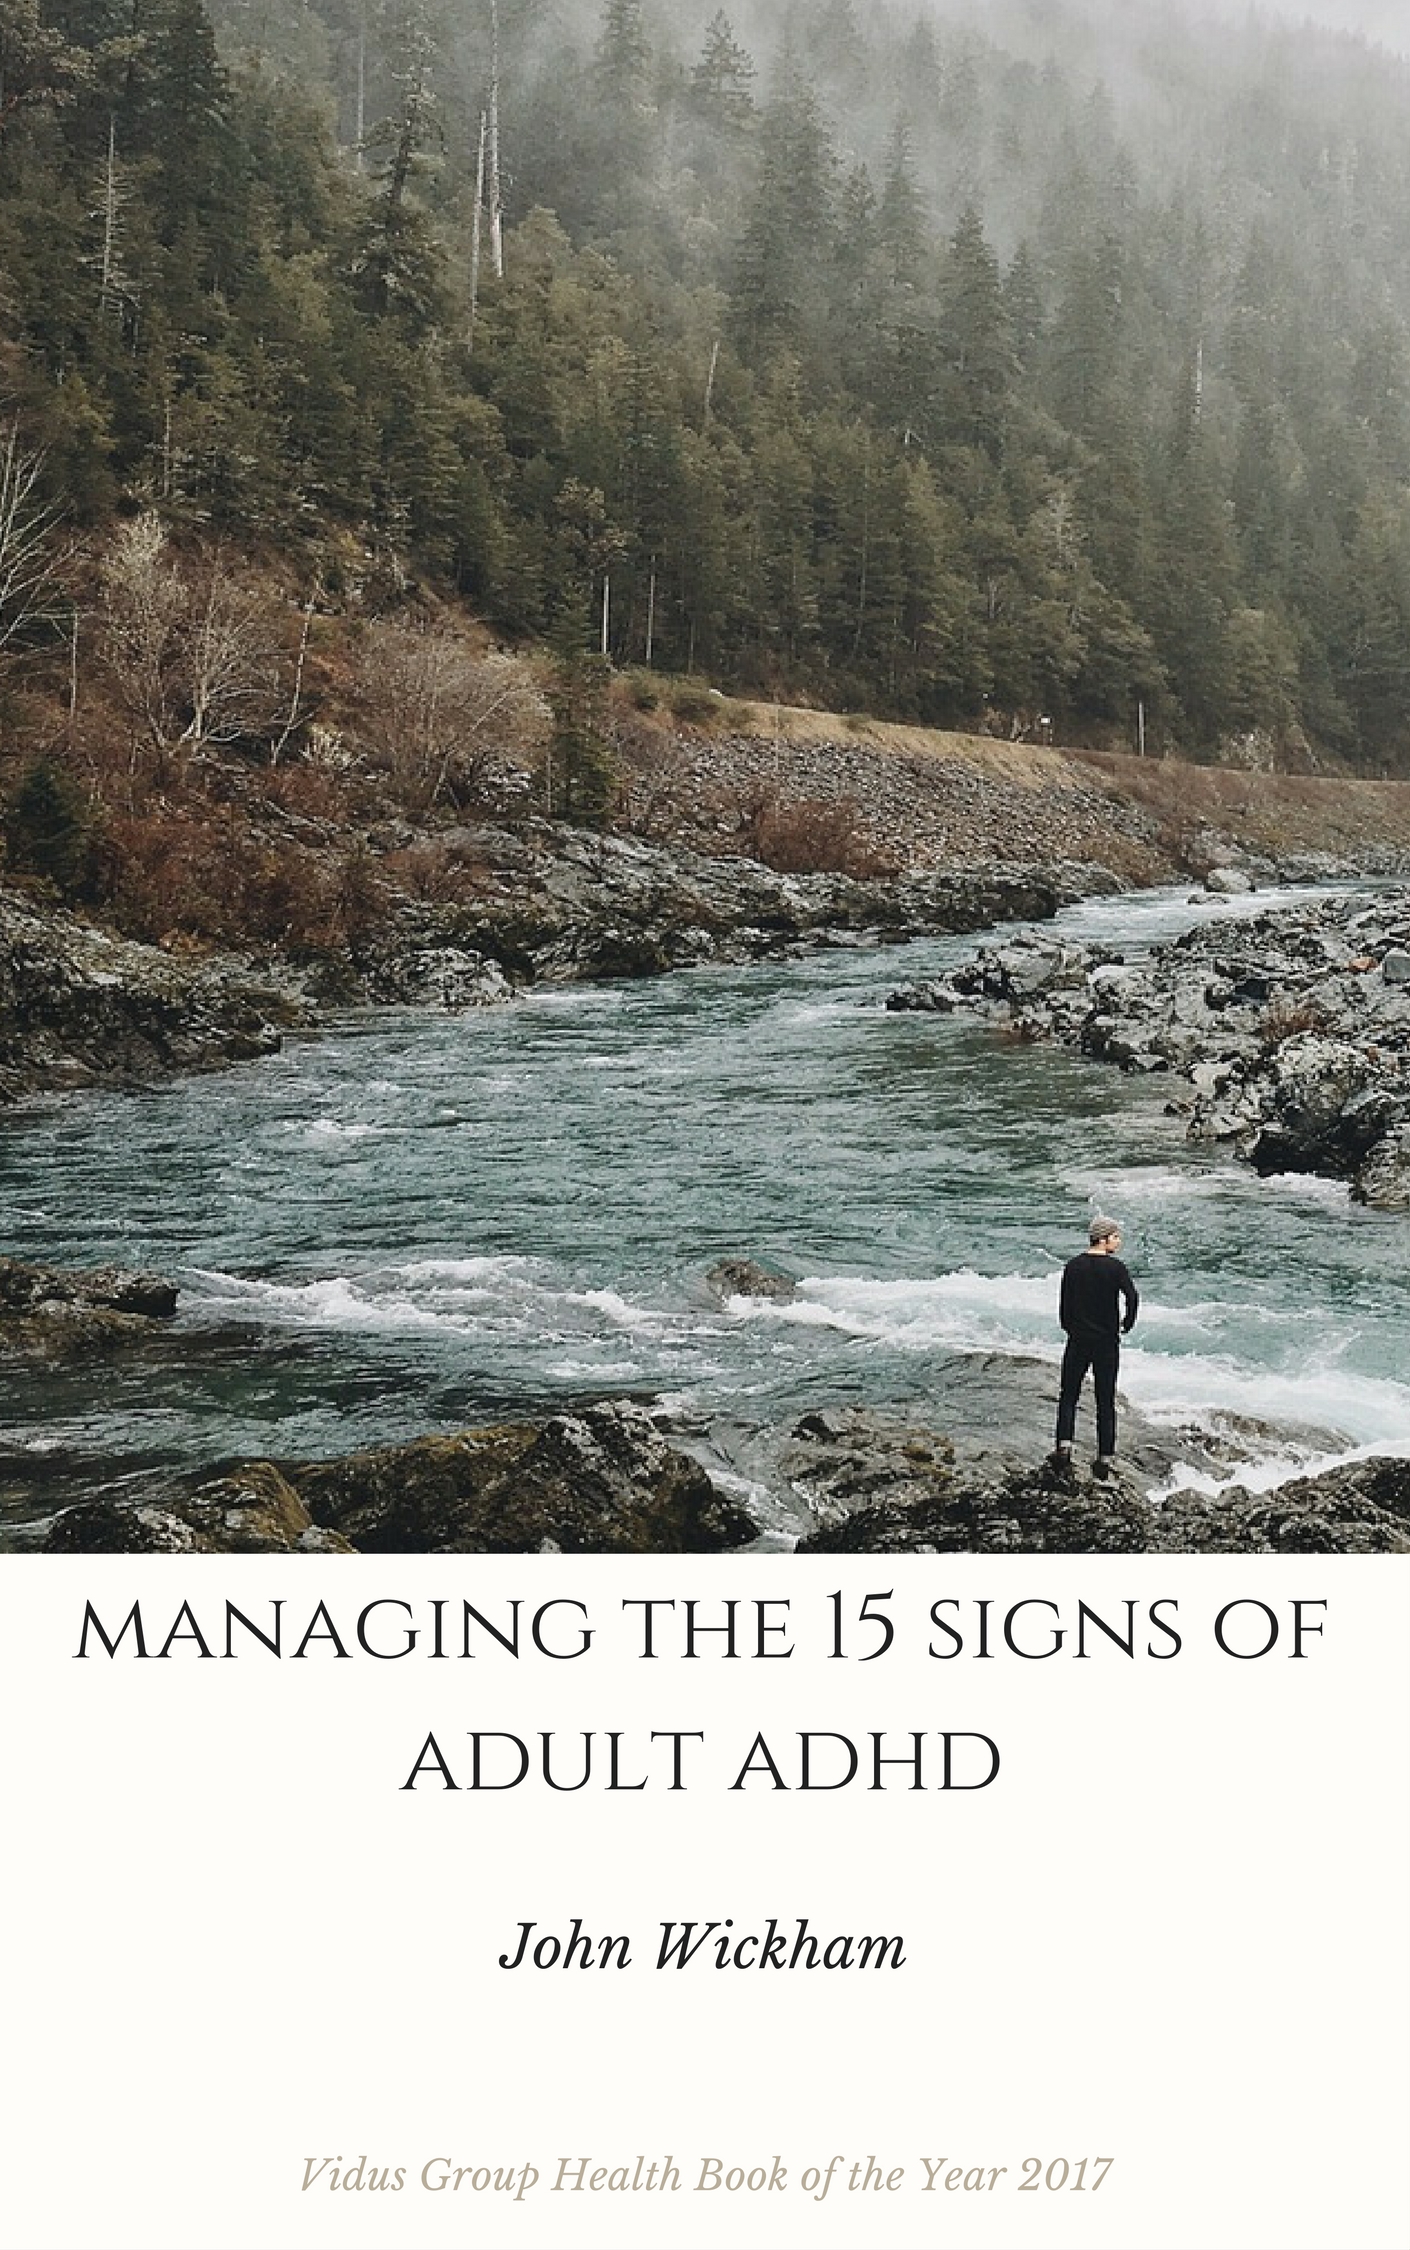 managing the 15 signs of adult adhd (2).jpg